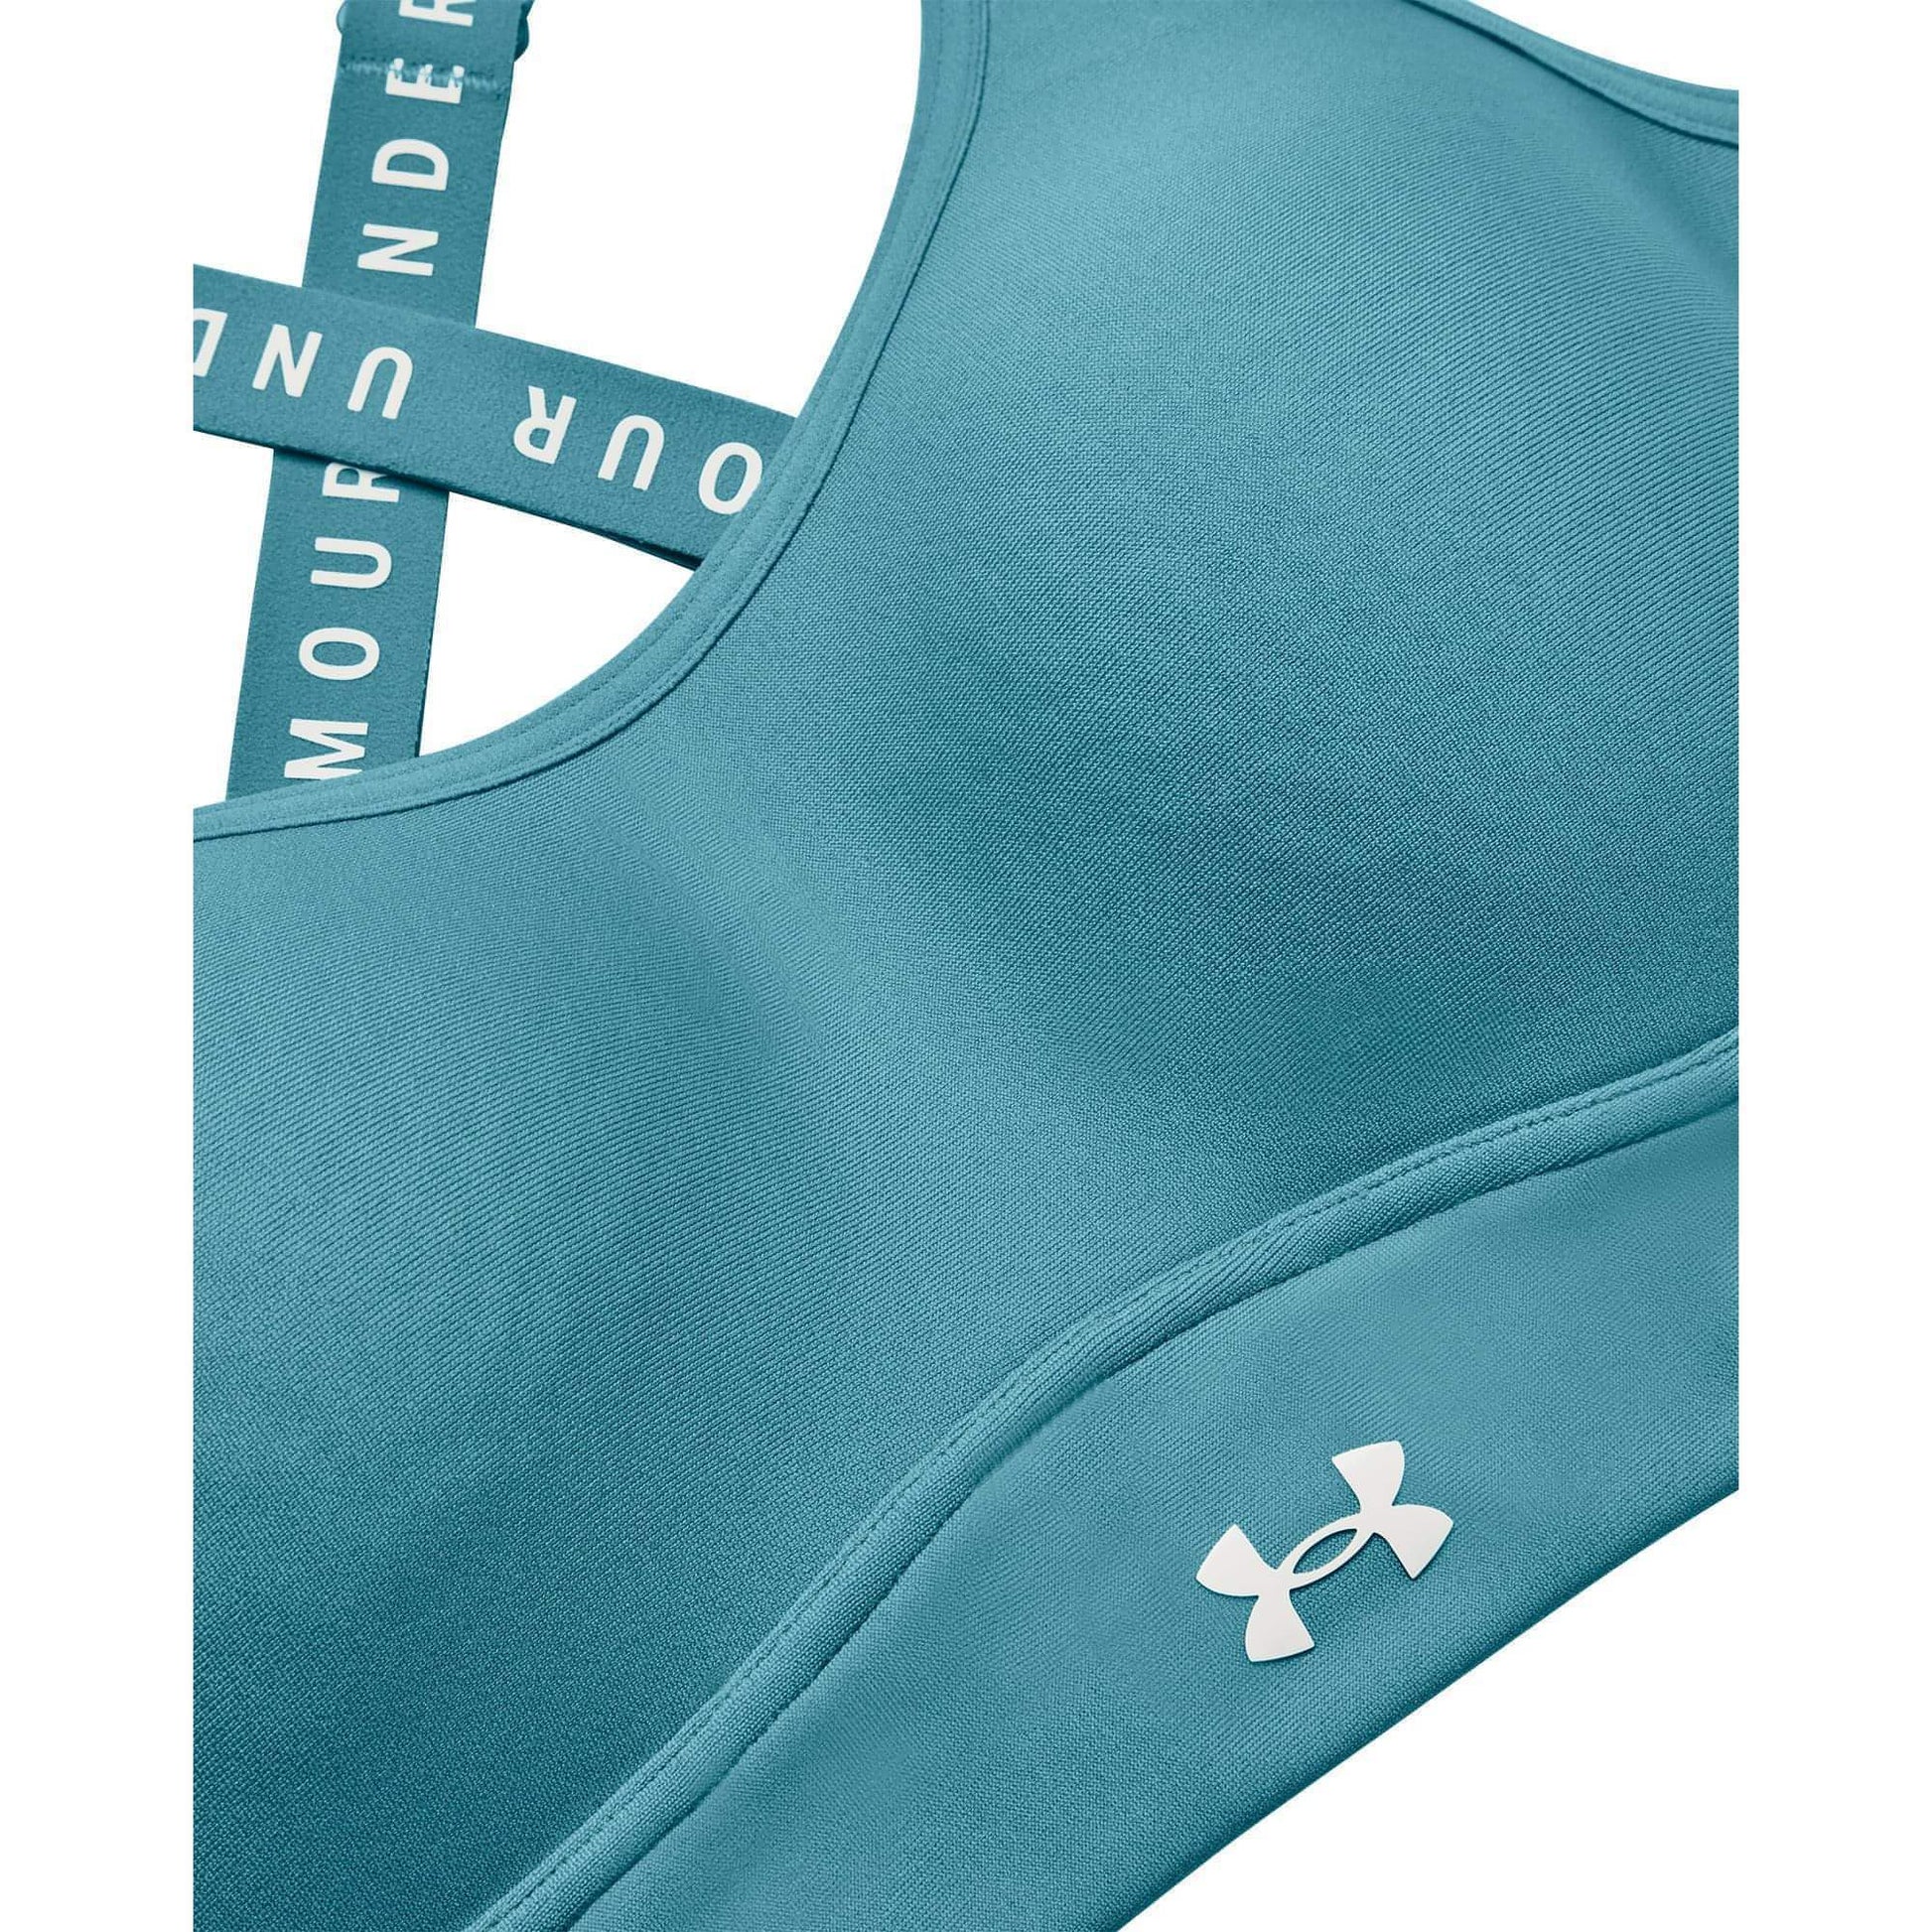 Under Armour Infinity Mid Covered Womens Sports Bra - Blue – Start